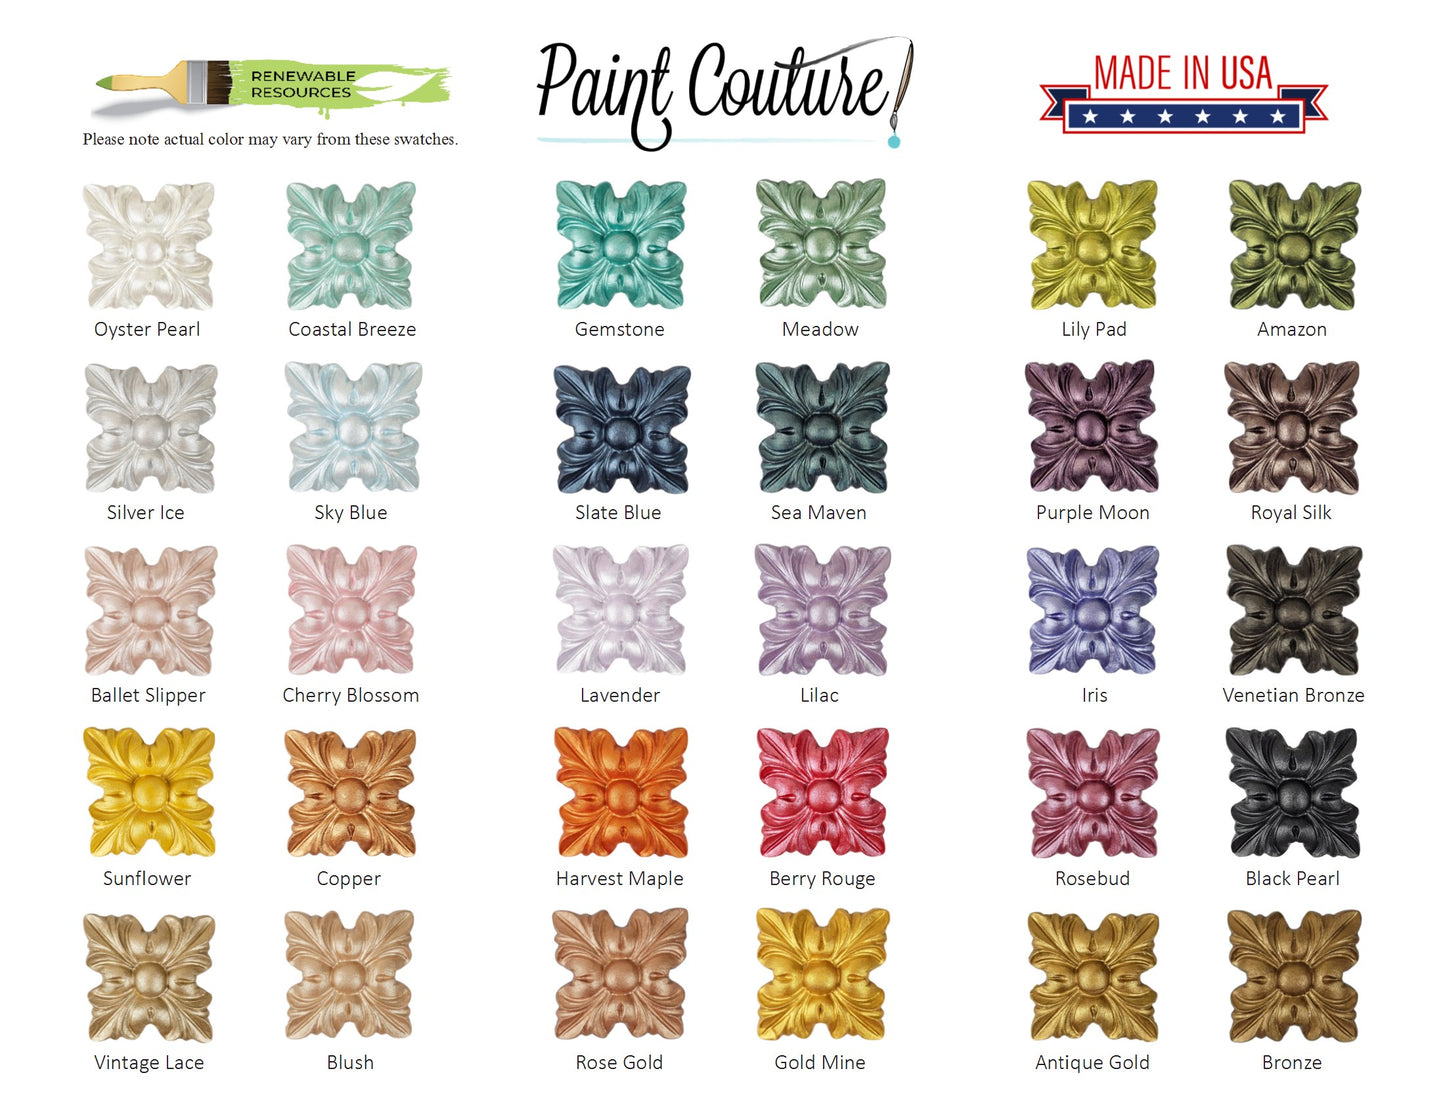 Paint Couture Lux Metallic Paint Lily Pad